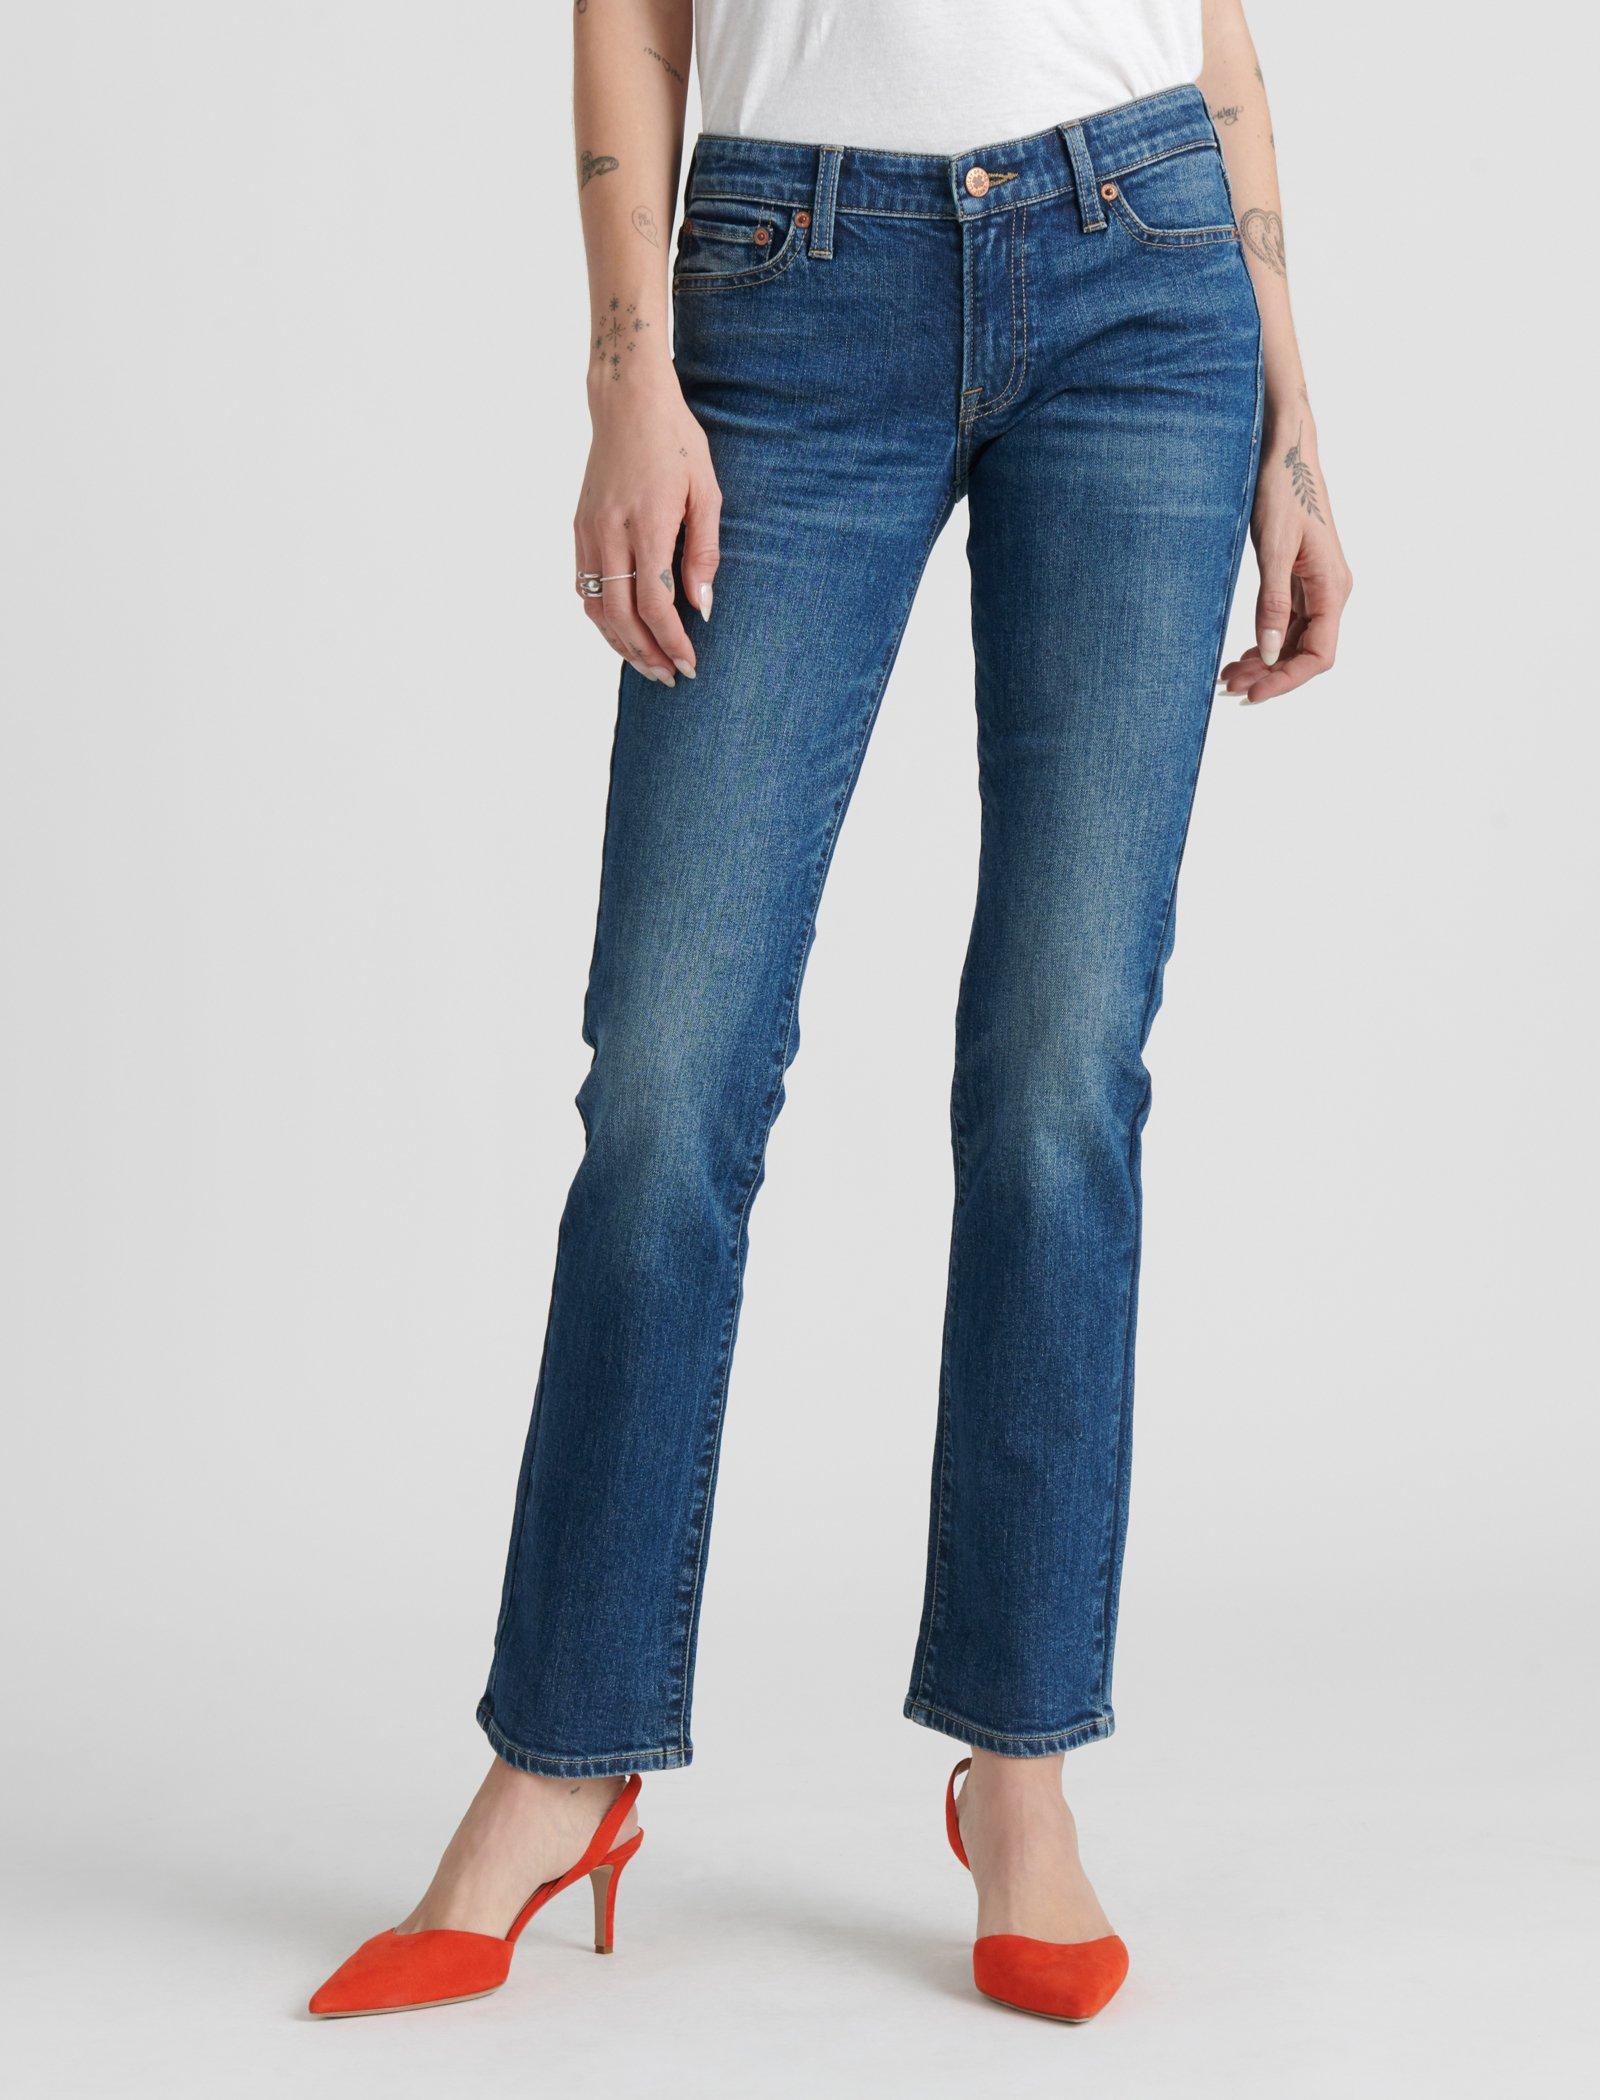 https://i1.adis.ws/i/lucky/7WD11173_420_2/MID-RISE-SWEET-STRAIGHT-JEAN-420?$large-2$